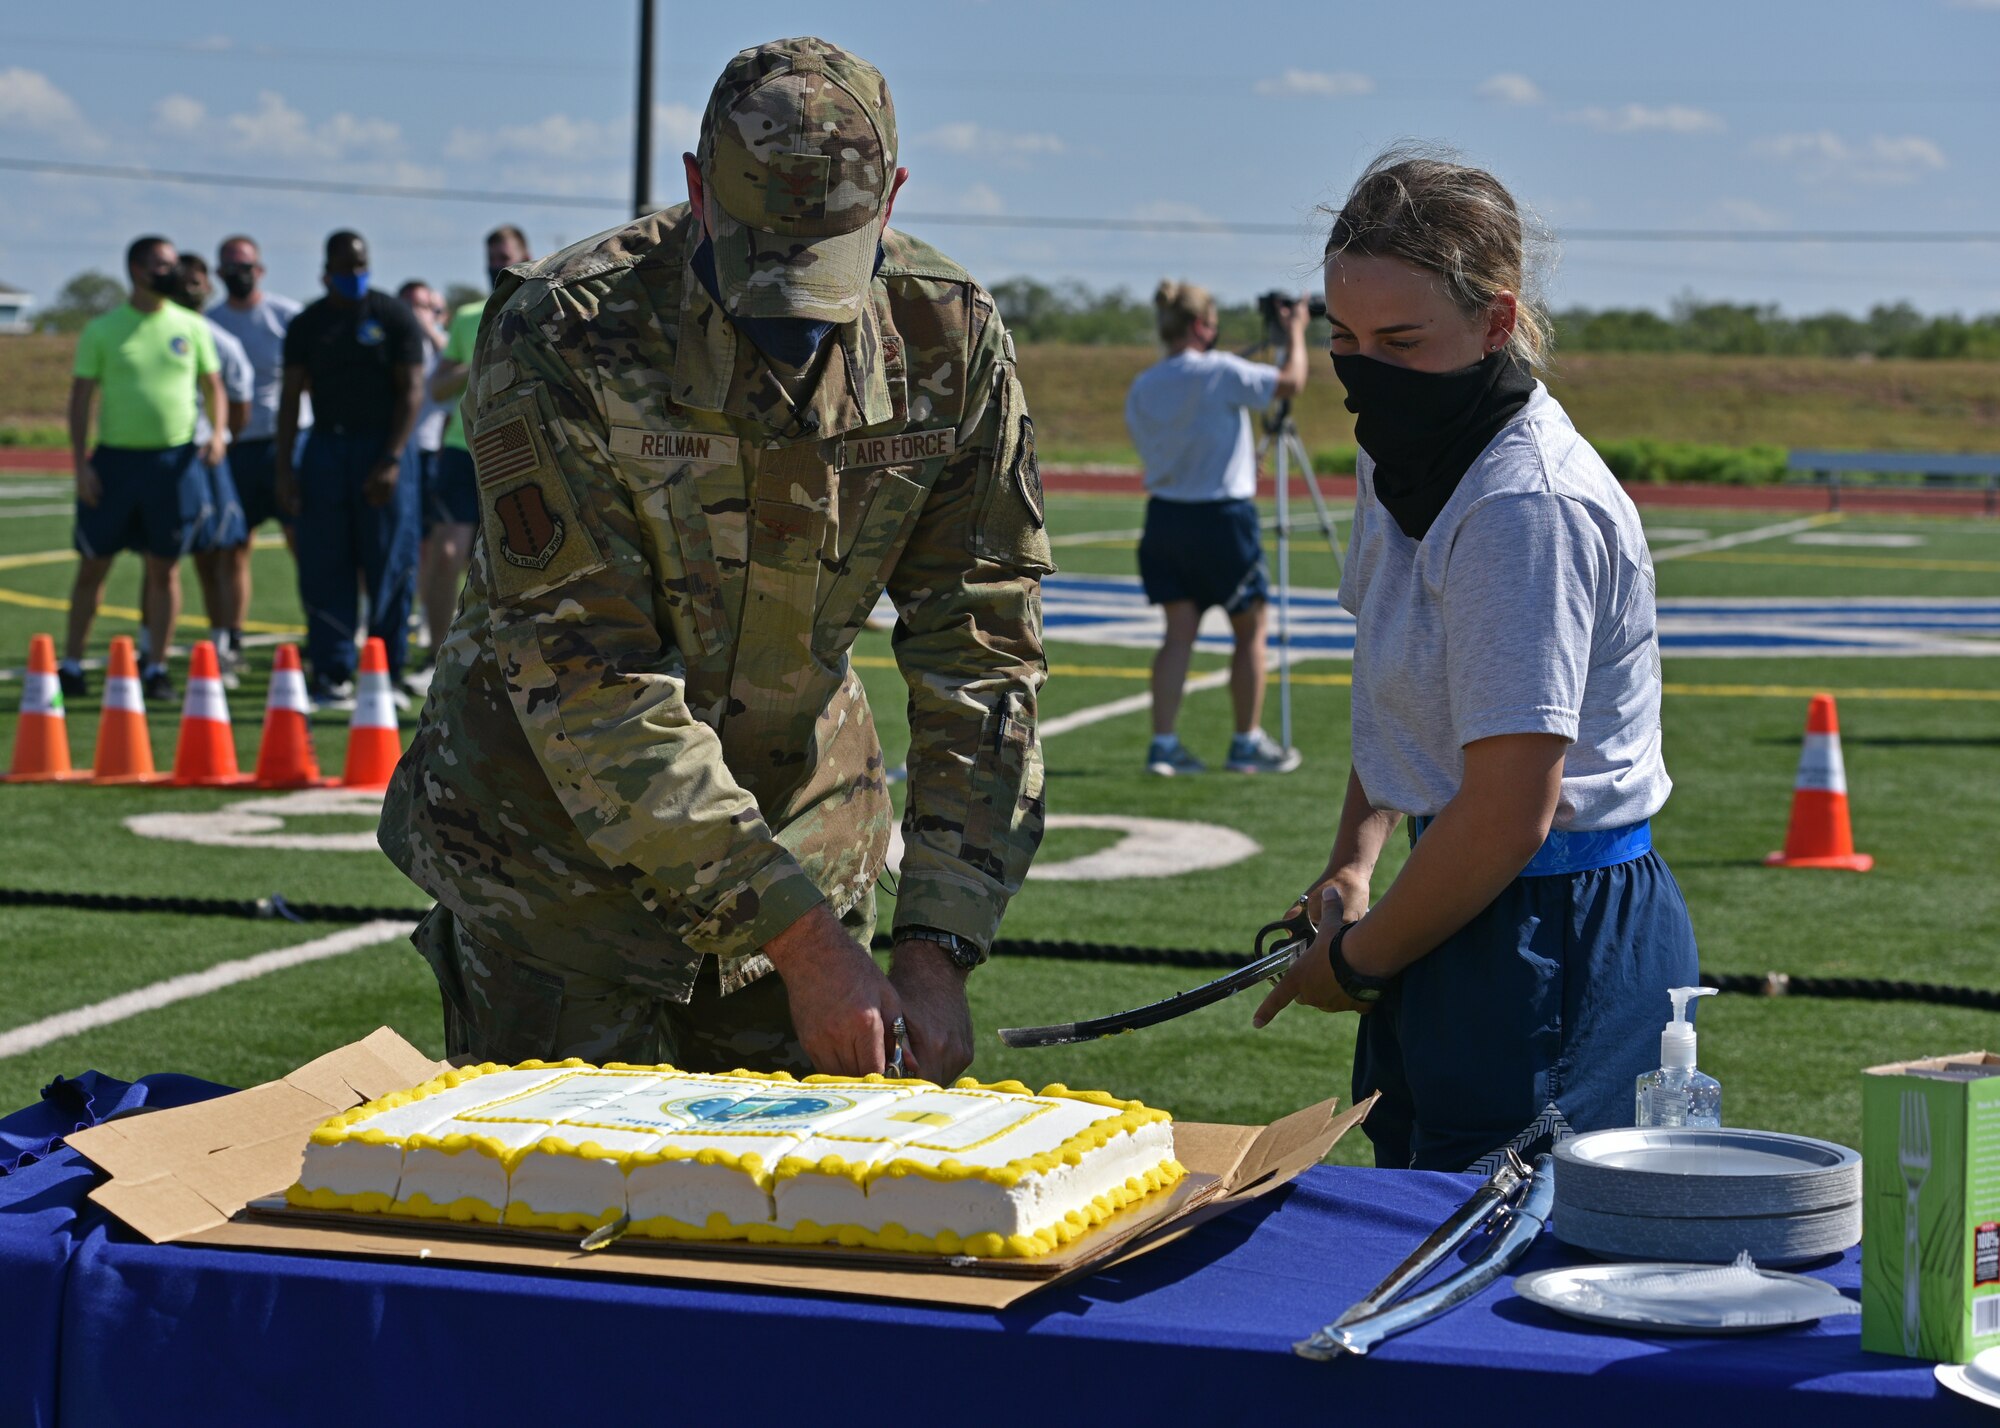 U.S. Air Force Col. Matthew Reilman, 17th Training Wing commander, and Airman 1st Class Gianna Grimaldi, 315th Training Squadron student, cut the cake at the end of Wing Sports Day on Goodfellow Air Force Base, Texas, Sept. 17, 2021. This momentous occasion is a part of a long-standing tradition that involves a senior ranking military member cutting the cake with the youngest Airman. (U.S. Air Force photo by Senior Airman Ashley Thrash)